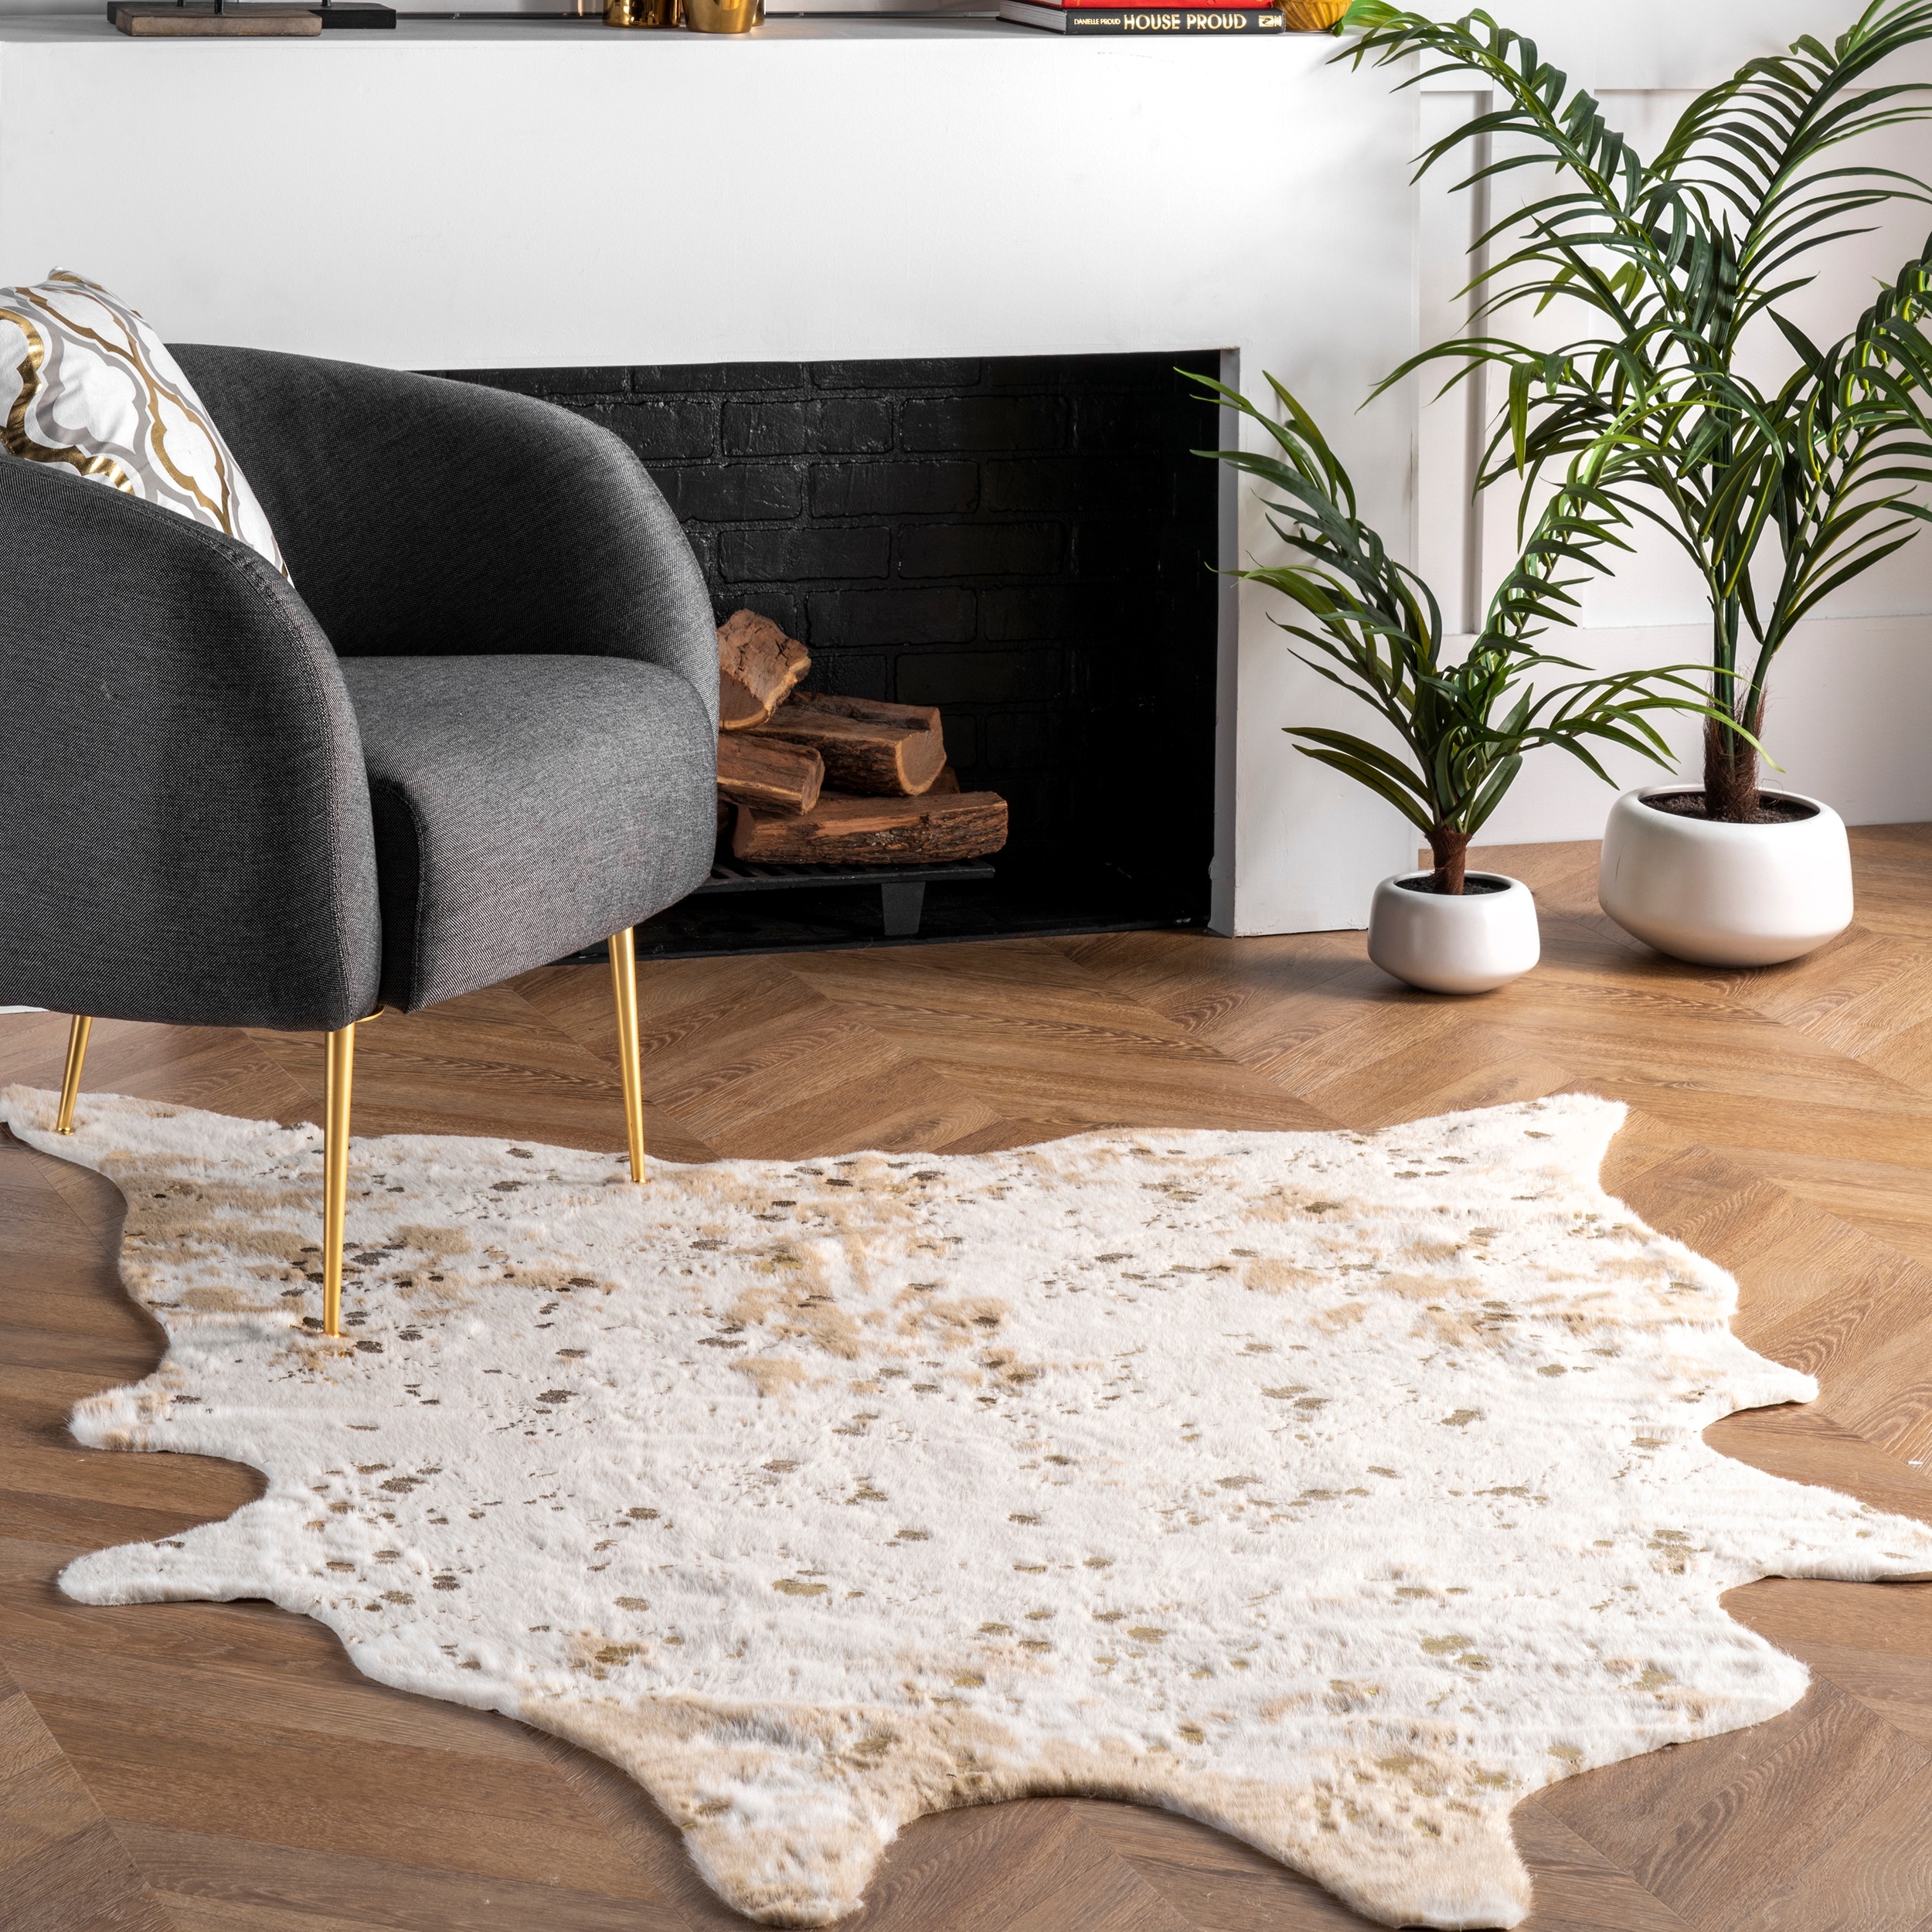 Details about   Natural Cow Hide Rug Leather Rug Skin Carpet Home Decor Black/White 5.25'x4.50' 